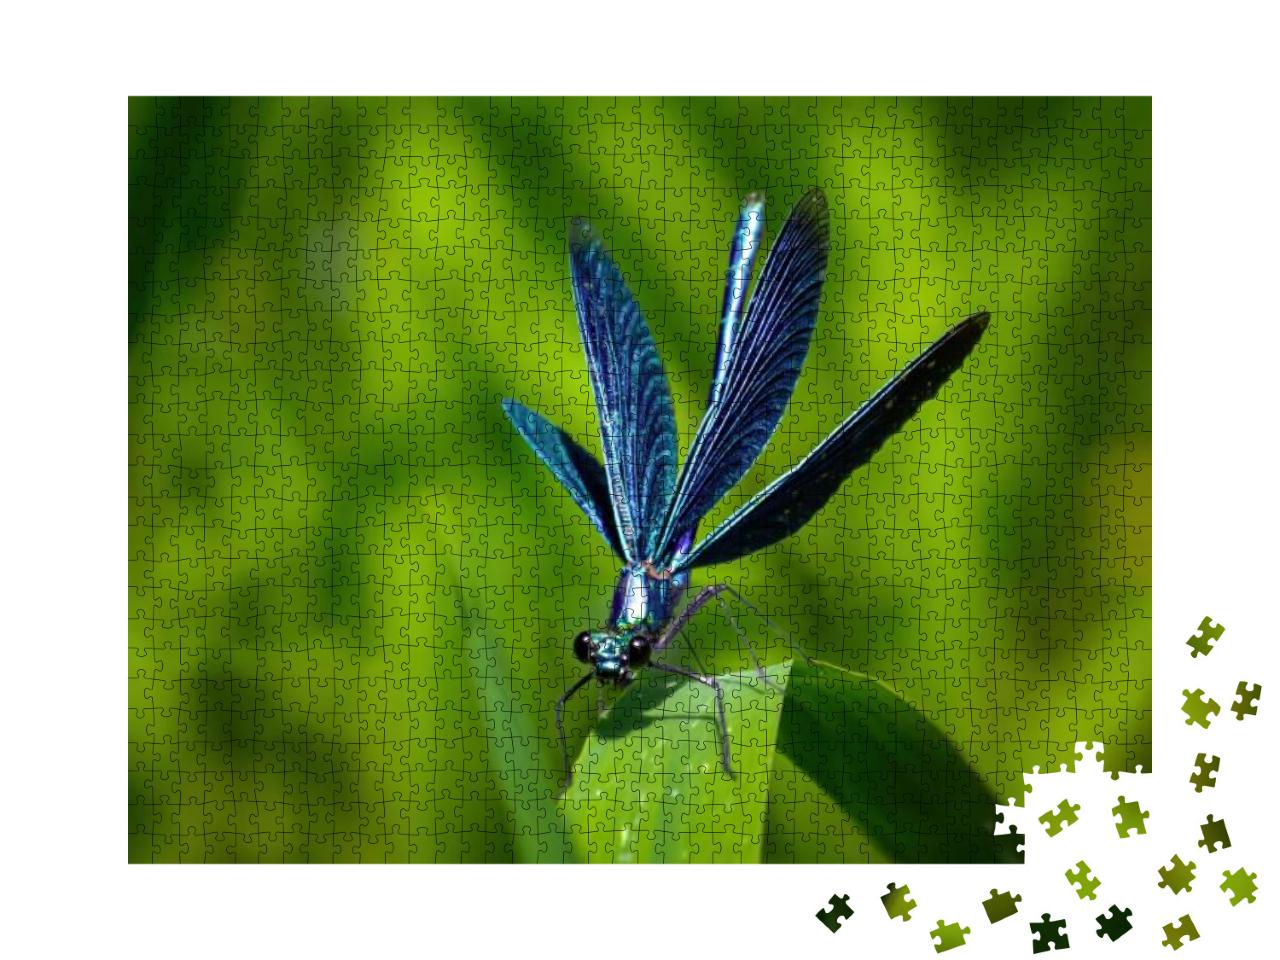 Dragonfly on a Green Leaf... Jigsaw Puzzle with 1000 pieces